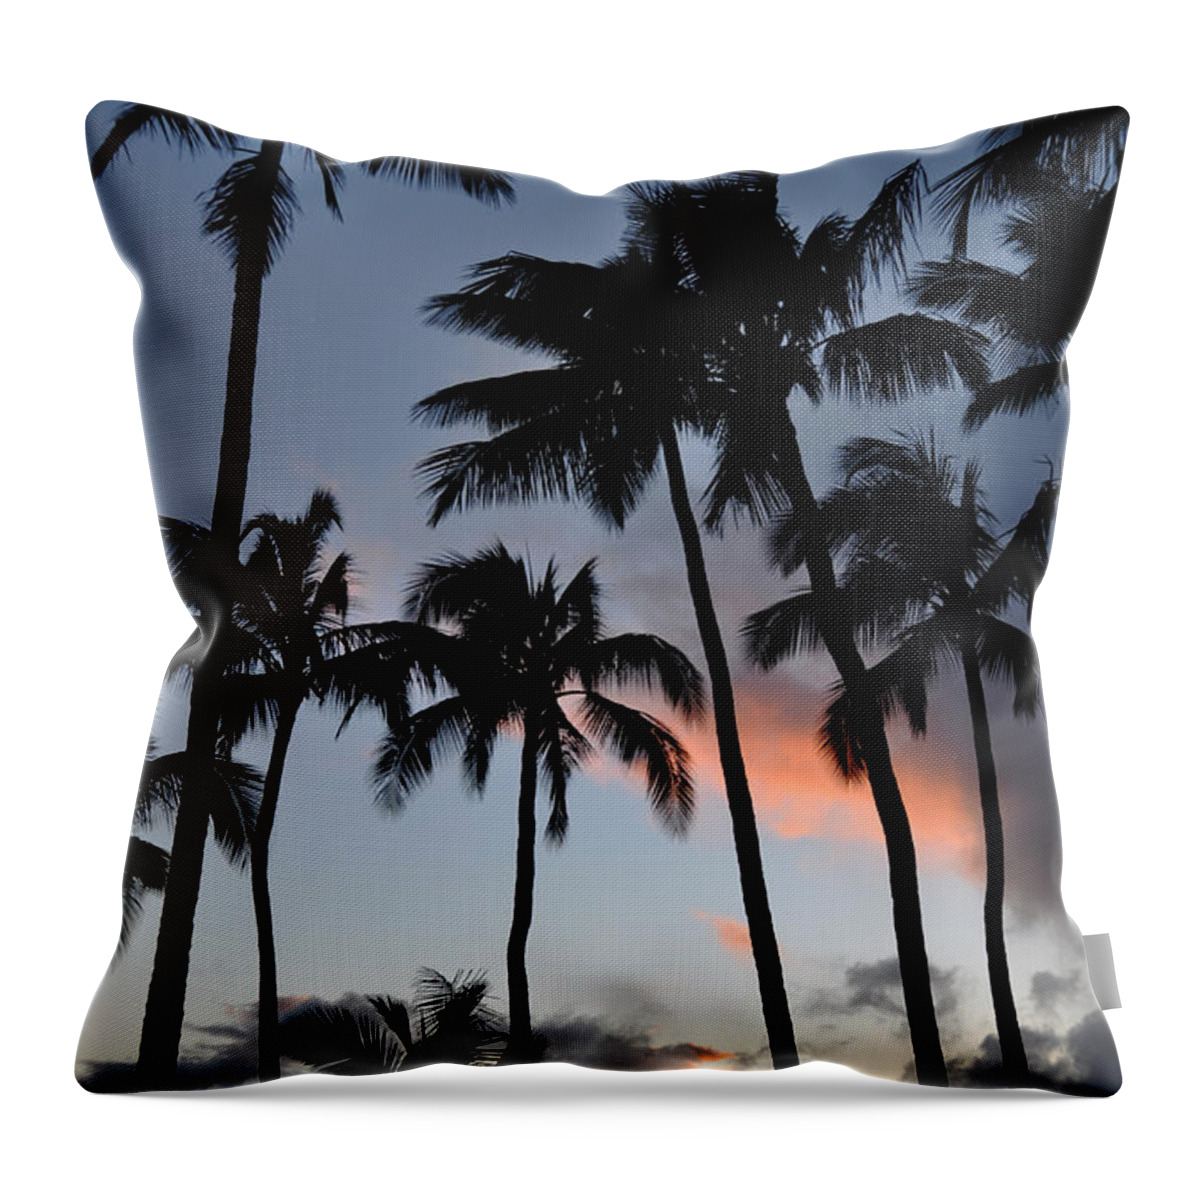 Sunset Palms Napili Bay Maui Hawaii Silhouettes Landscape Throw Pillow featuring the photograph Sunset Palms by Kelly Wade